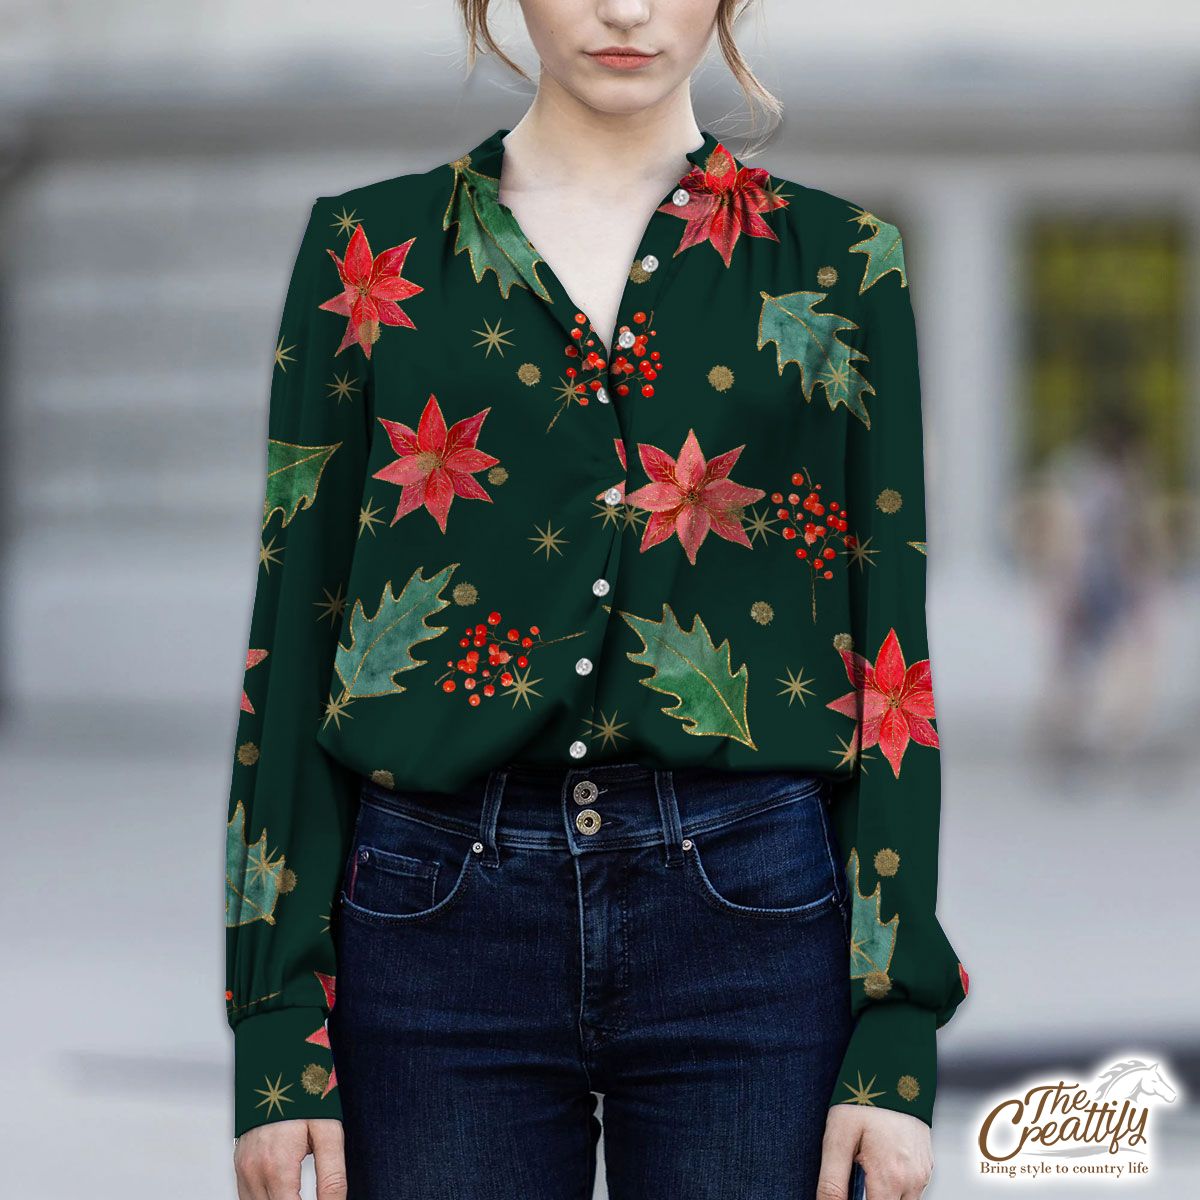 Poinsettias For Christmas And Holly Leaf Pattern V-Neckline Blouses